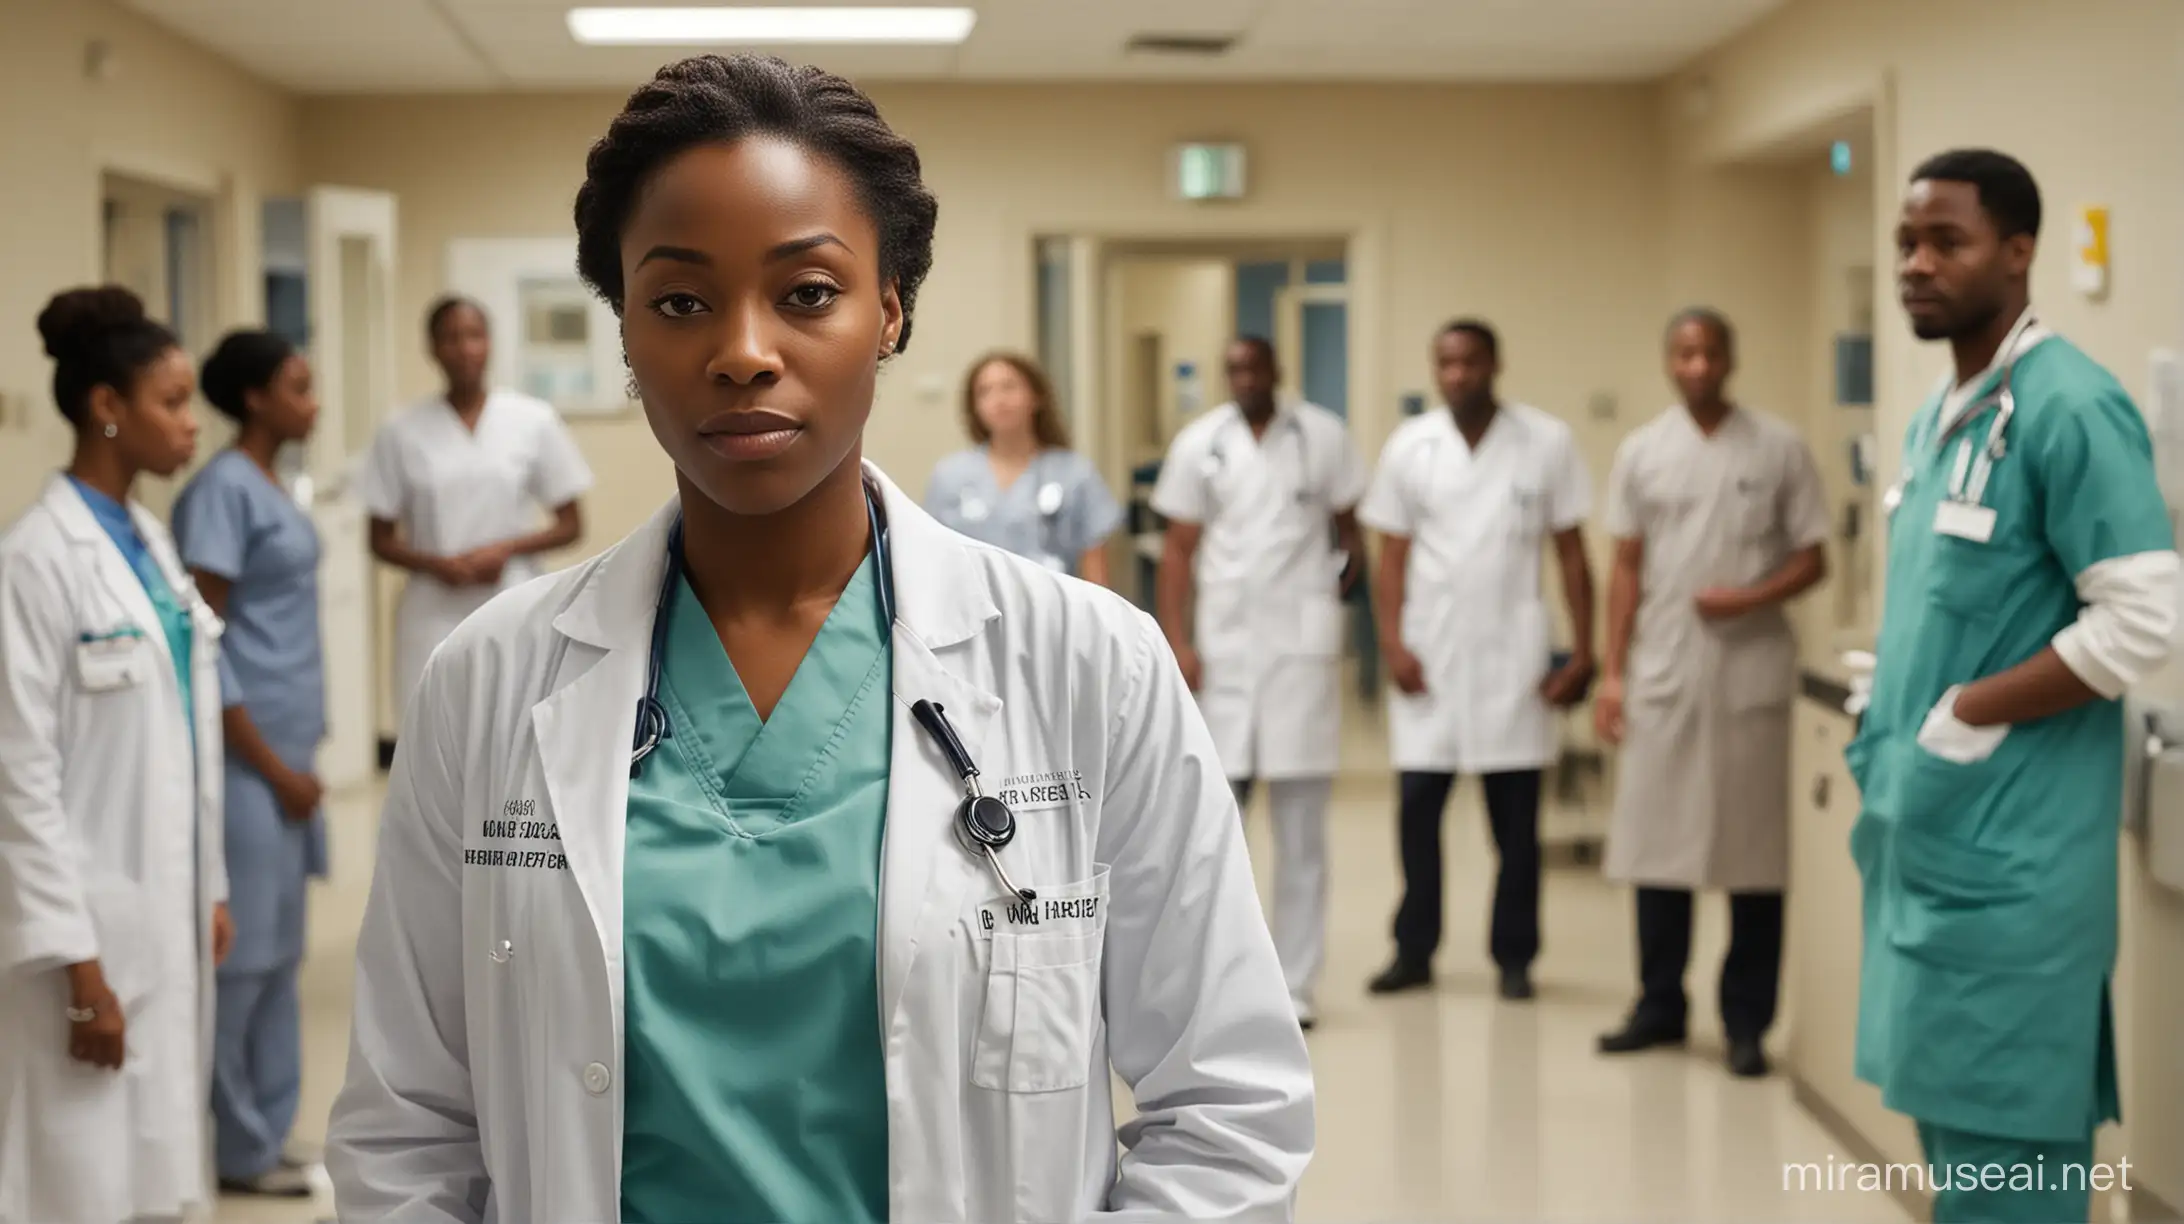 In the heart of a bustling hospital ward, an African American doctor stands with poise and authority, a beacon of calm amidst the organized chaos. Dressed in the distinctive white coat of their profession, they exude confidence and expertise as they oversee the flurry of activity around them. Surrounded by nurses, medical staff, and patients, the doctor commands attention with their presence alone. Their posture is upright, their expression focused yet compassionate as they assess the needs of their patients and coordinate care. Despite the constant movement and noise of the ward, the doctor remains unruffled, their demeanor a reassuring presence for both patients and colleagues alike. With a keen eye for detail and a wealth of medical knowledge, they are a trusted leader in the midst of the medical team. As they navigate the busy hospital ward, the African American doctor embodies the values of dedication, compassion, and professionalism that define their profession. Their commitment to excellence and patient care shines through in every interaction, making them a source of inspiration and admiration for all who cross their path.